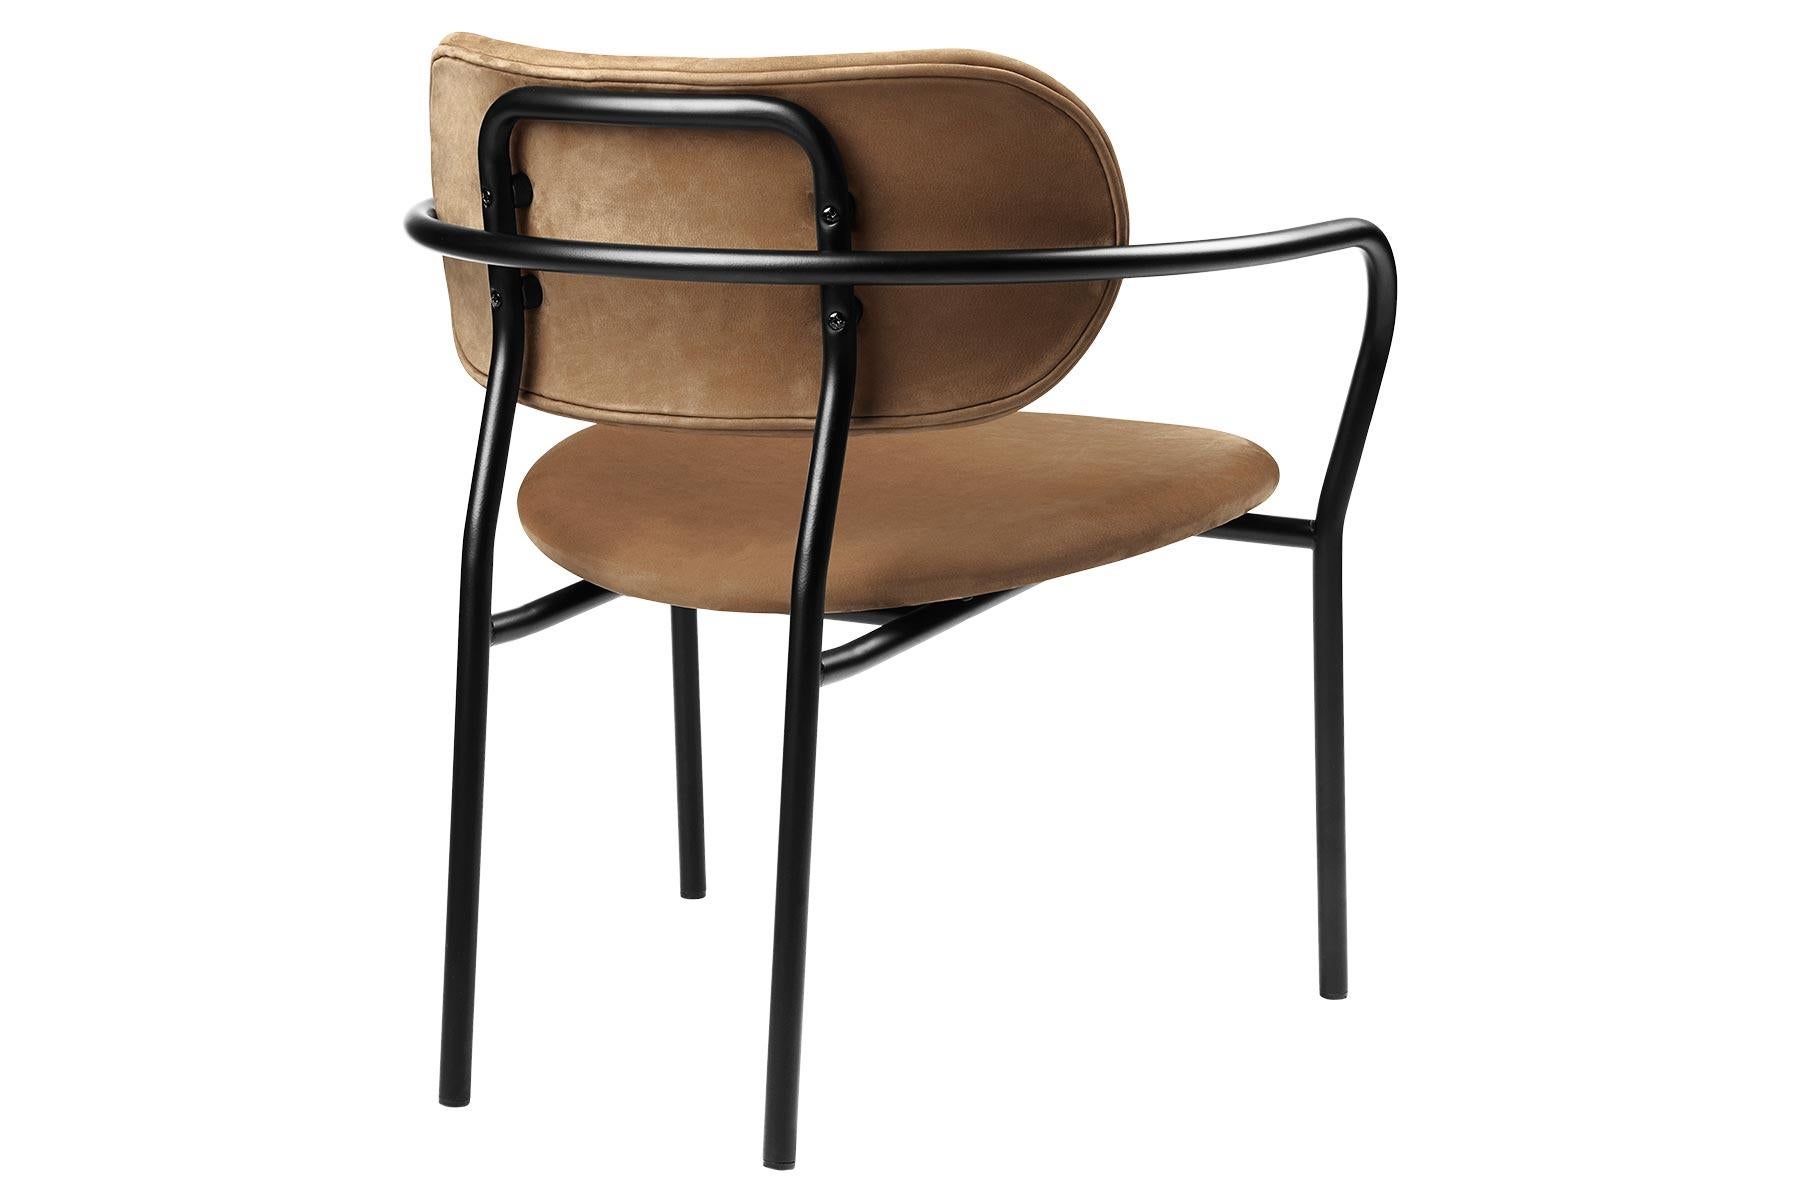 The Coco lounge chair with armrest is part of the Coco collection, designed by OEO Studio with an eye to create a charismatic signature design that offers a high level of comfort. The chair borrows references to the industrial simplicity, fashion